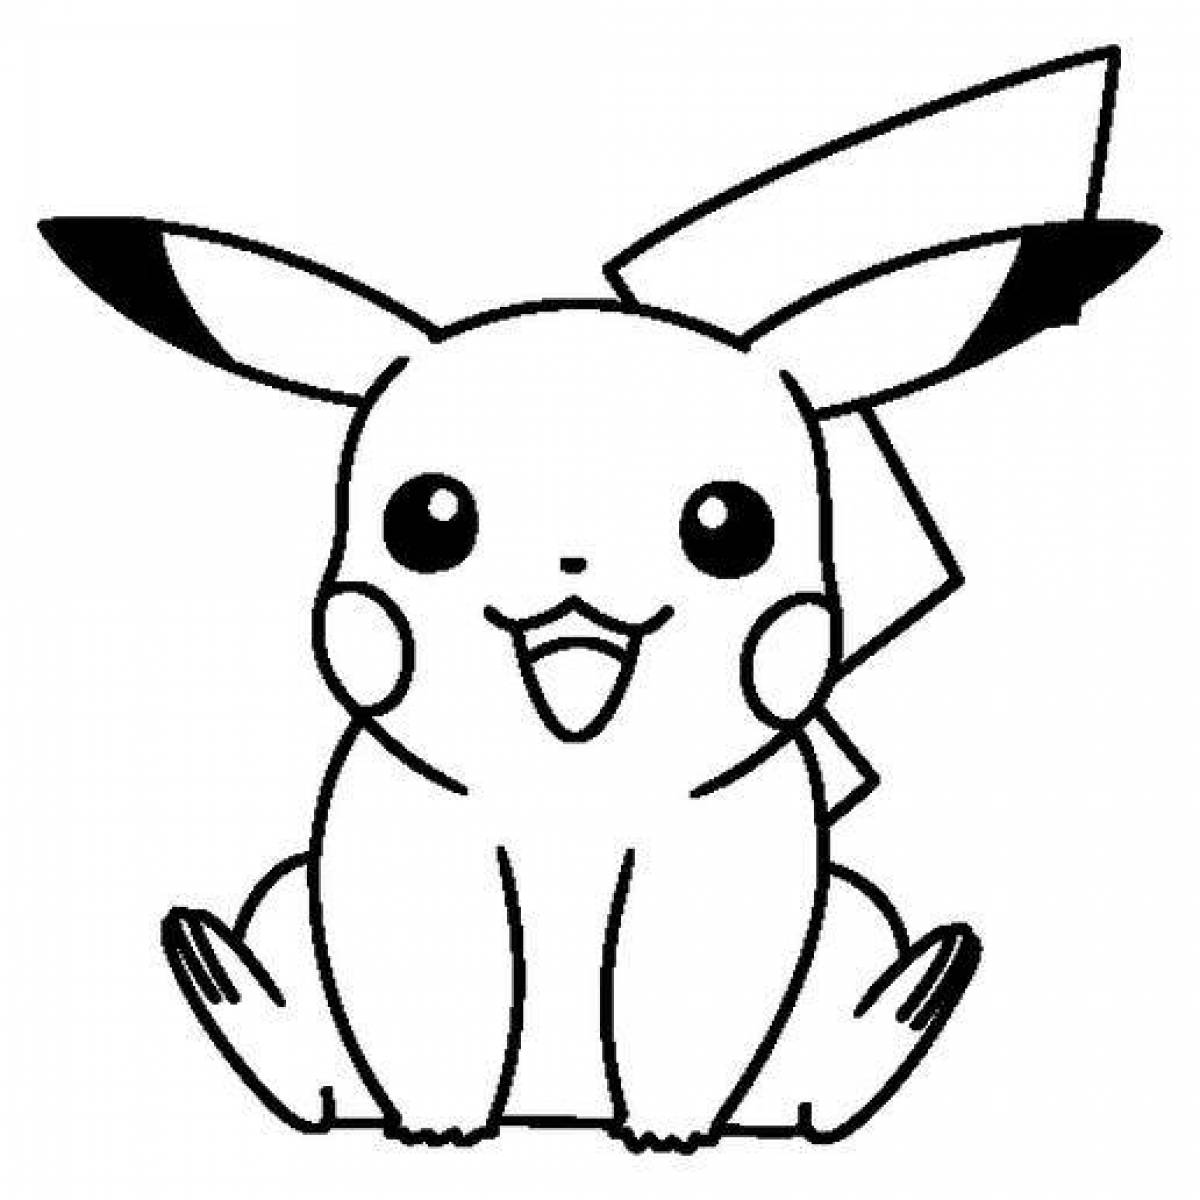 Coloring page adorable pikachu